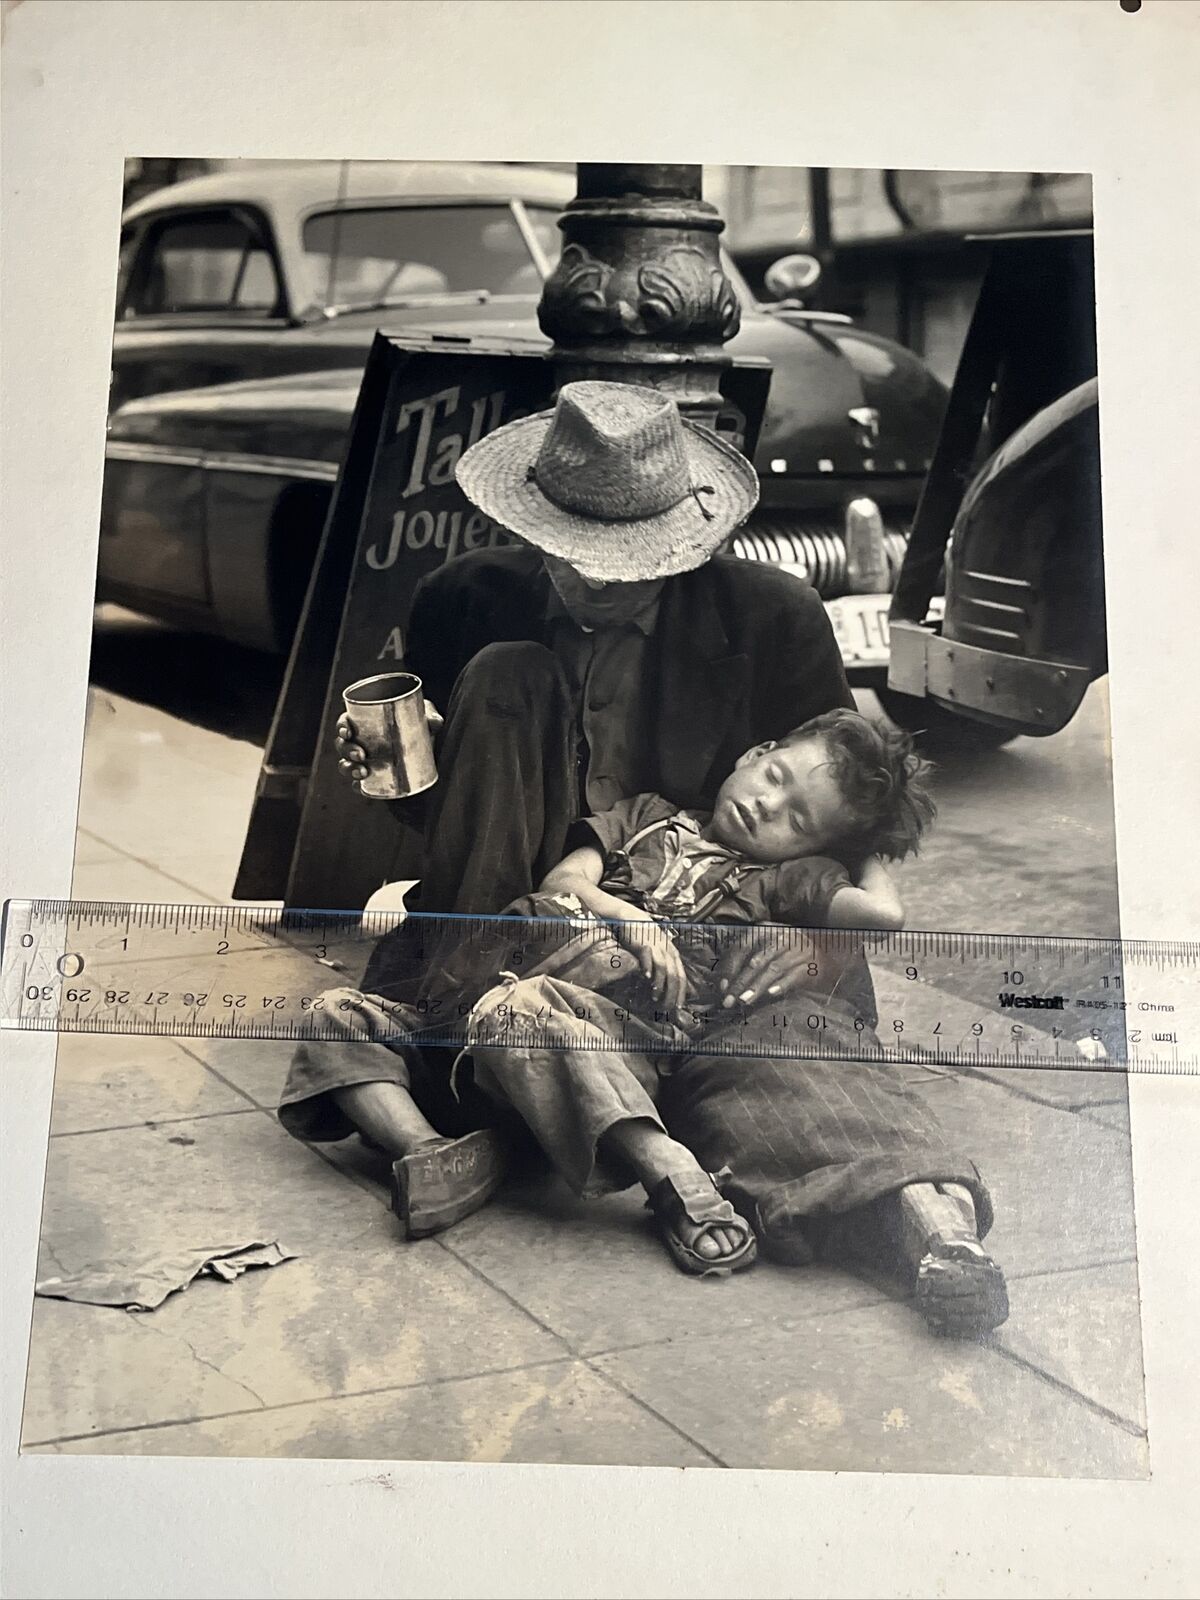 PAUL SUSSMAN 1949 Photo BEGGAR and CHILD Rare Important Image 14x11 STREET PHOTO